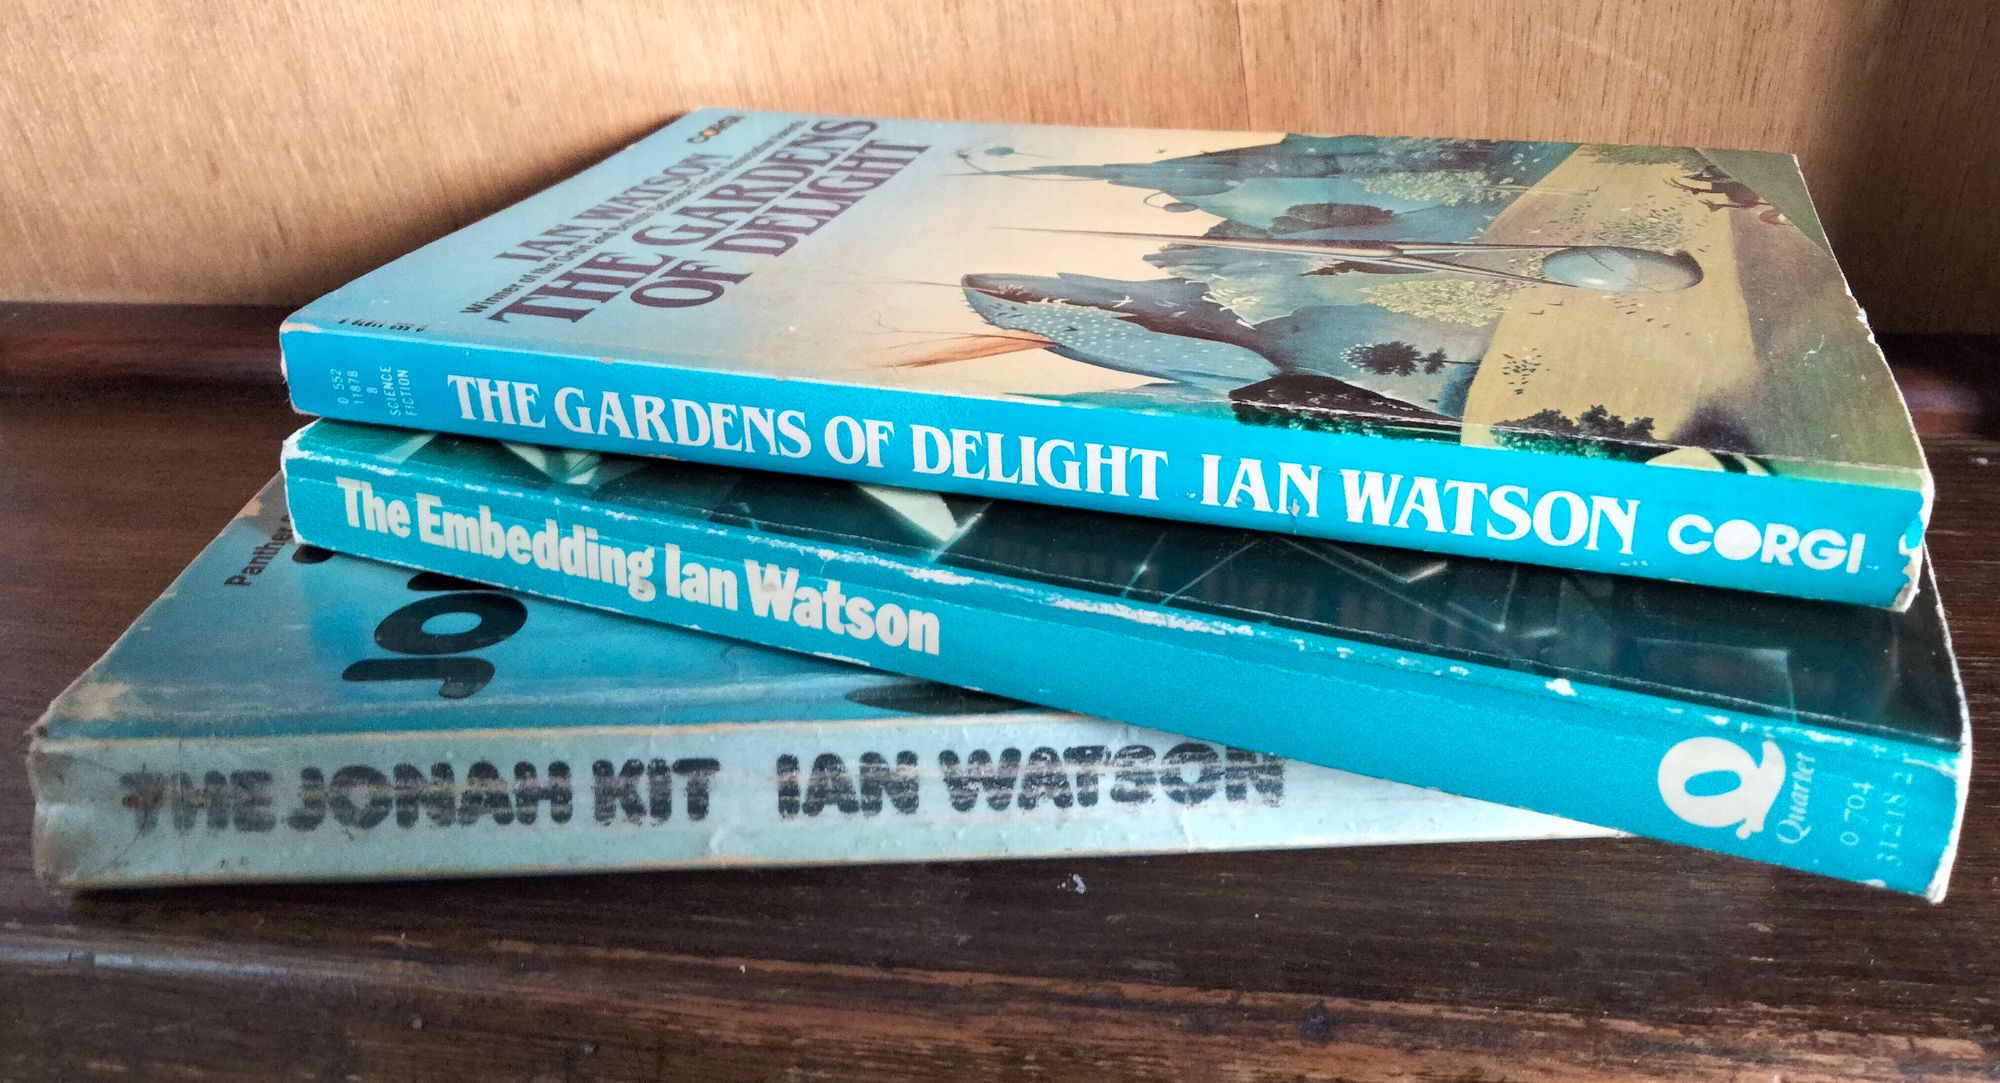 Photo of three old paperback novels stacked loosely together: "The Gardens of Delight", "The Embedding" and "The Jonah Kit", all by Ian Watson.